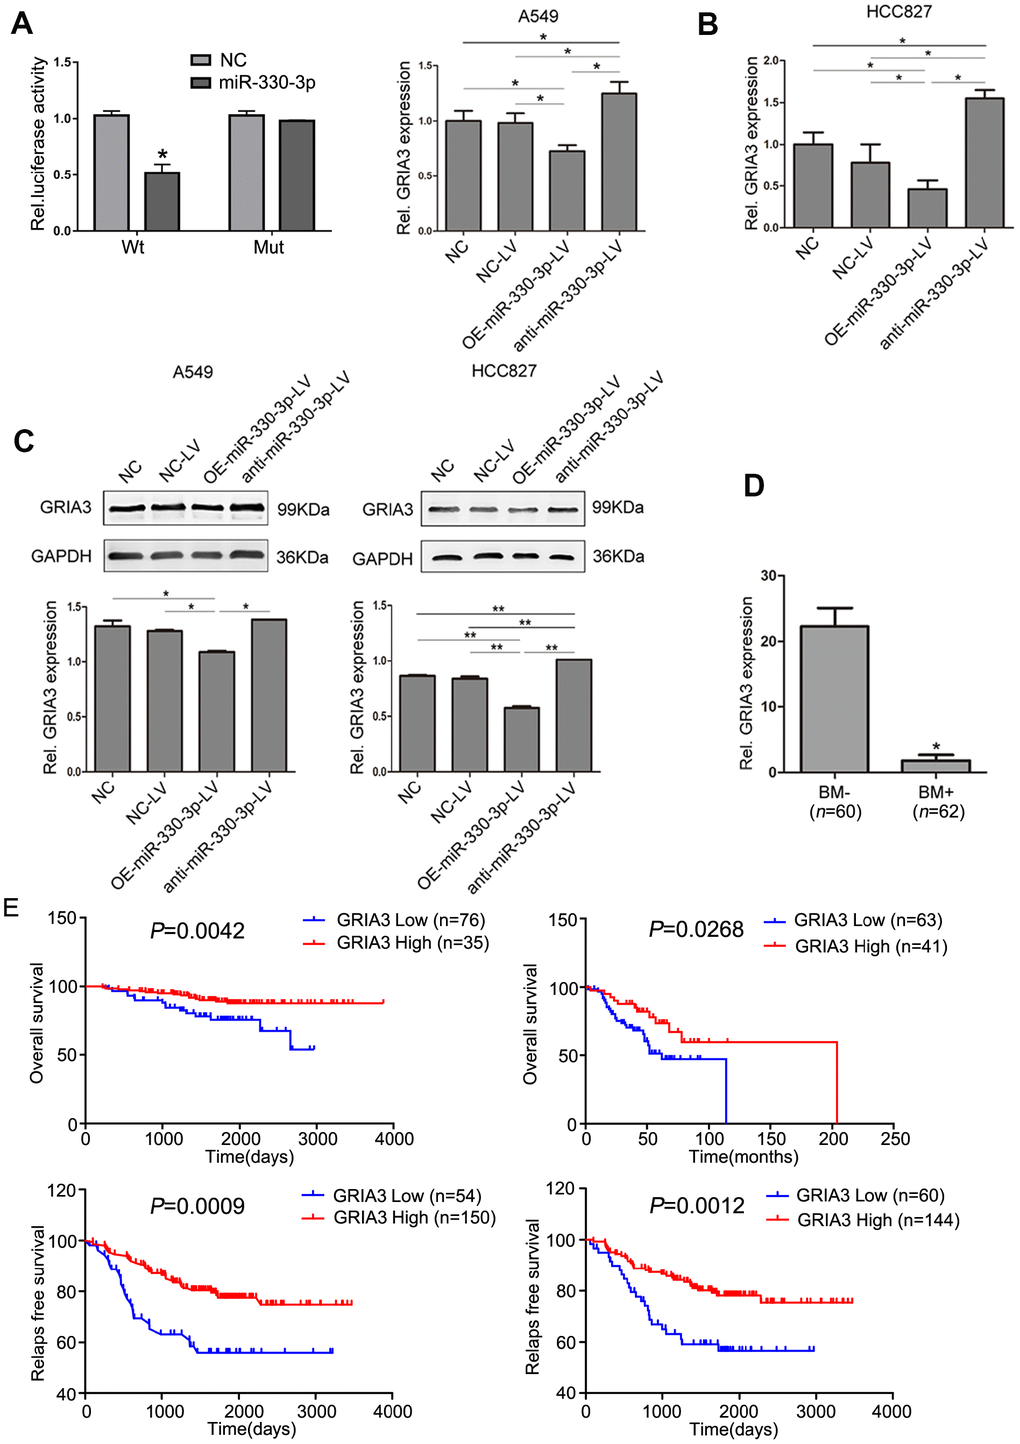 GRIA3 is a direct target of miR-330-3p. (A) Relative luciferase activity of 293T cells after co-transfection with wild type (Wt) or mutant (Mt) GRIA3 3′ UTR reporter genes and miR-330-3p mimics or control. (B) Expression of GRIA3 mRNA in A549 and HCC827-transfected cells was determined by qRT-PCR. (C) The expression of GRIA3 was analyzed in A549 and HCC827 transfected cells by western blotting. (D) Expression of GRIA3 mRNA in peripheral blood from 62 newly diagnosed BM+ and 60 newly diagnosed BM- NSCLC patients using qRT-PCR. (E) Kaplan-Meier plots with log rank test for overall survival and relapse-free survival of lung adenocarcinoma cancer patients with high GRIA3 expression and low GRIA3 expression, respectively. Data represent mean ± SD, *P P P value was calculated by one-way ANOVA.